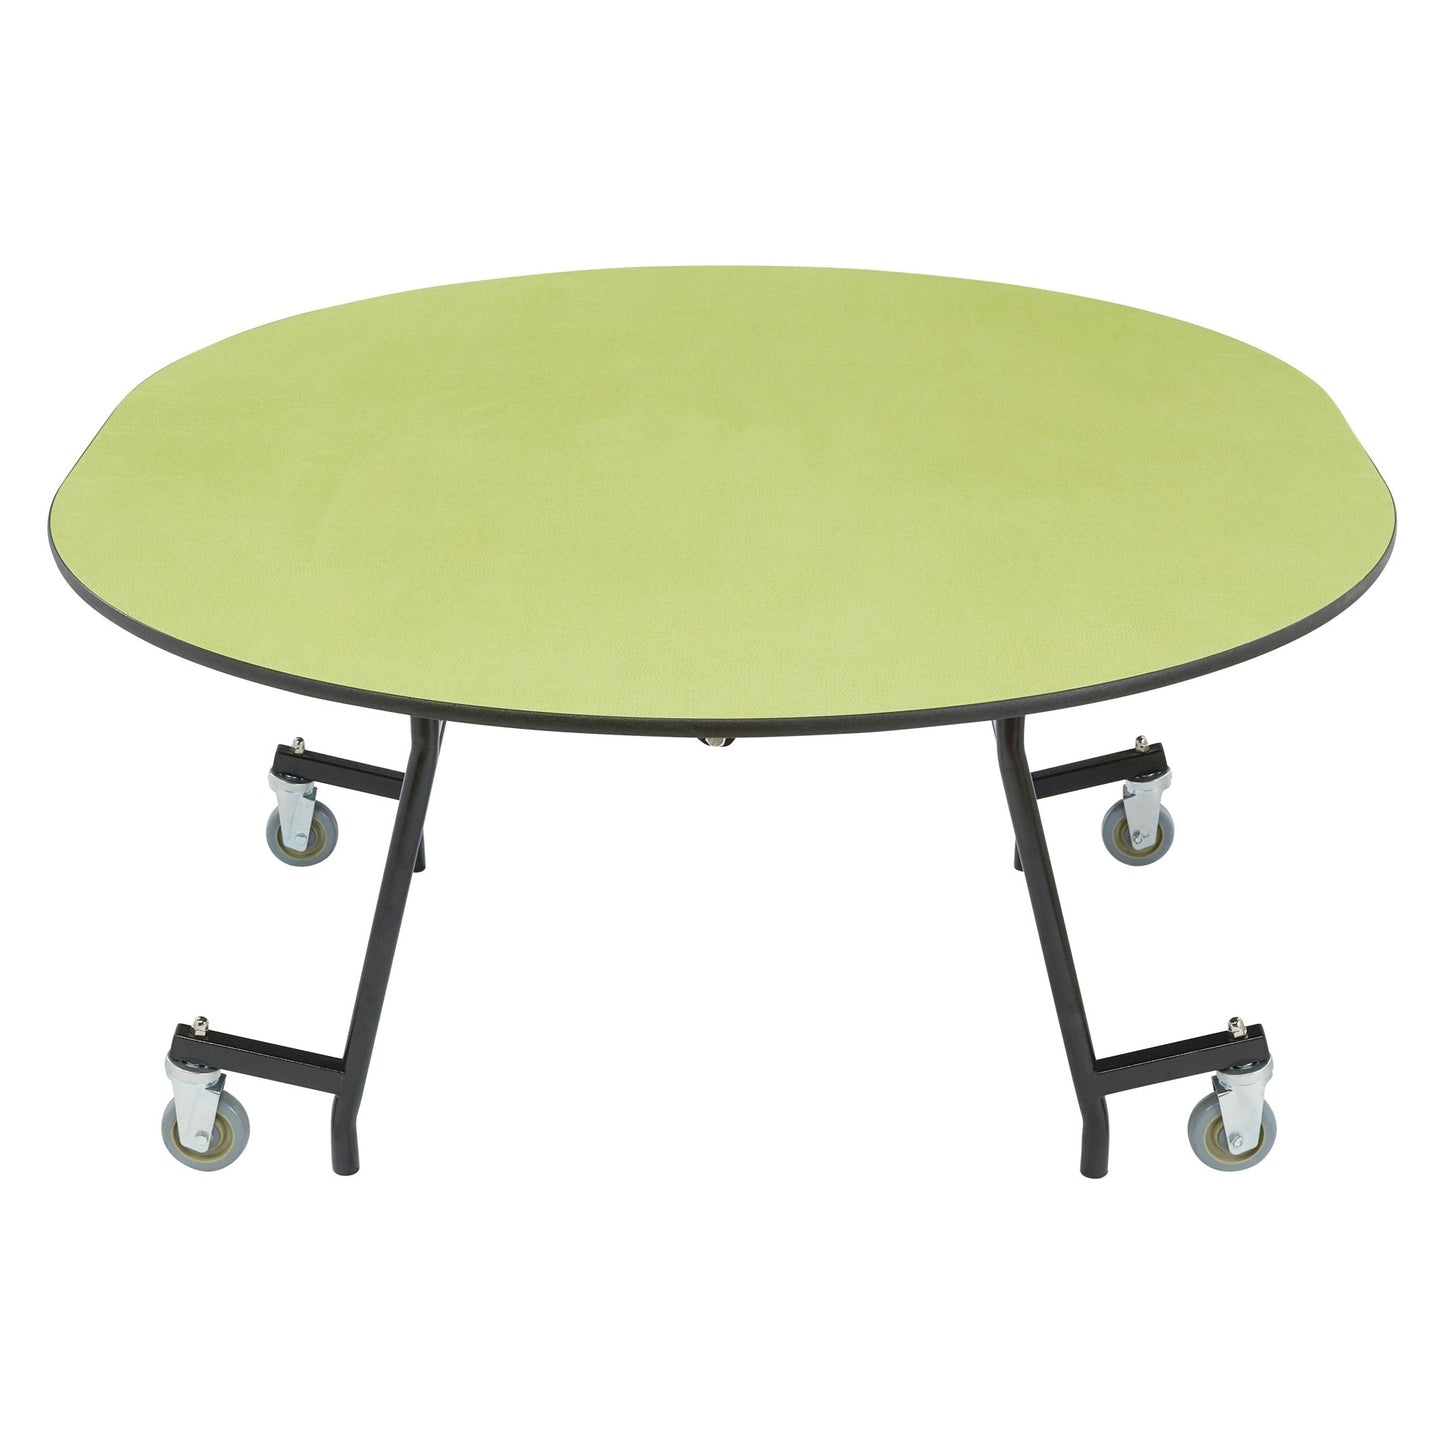 NPS EasyFold 60" x 72" Oval Table (National Public Seating NPS-MTSSF-60V) - SchoolOutlet